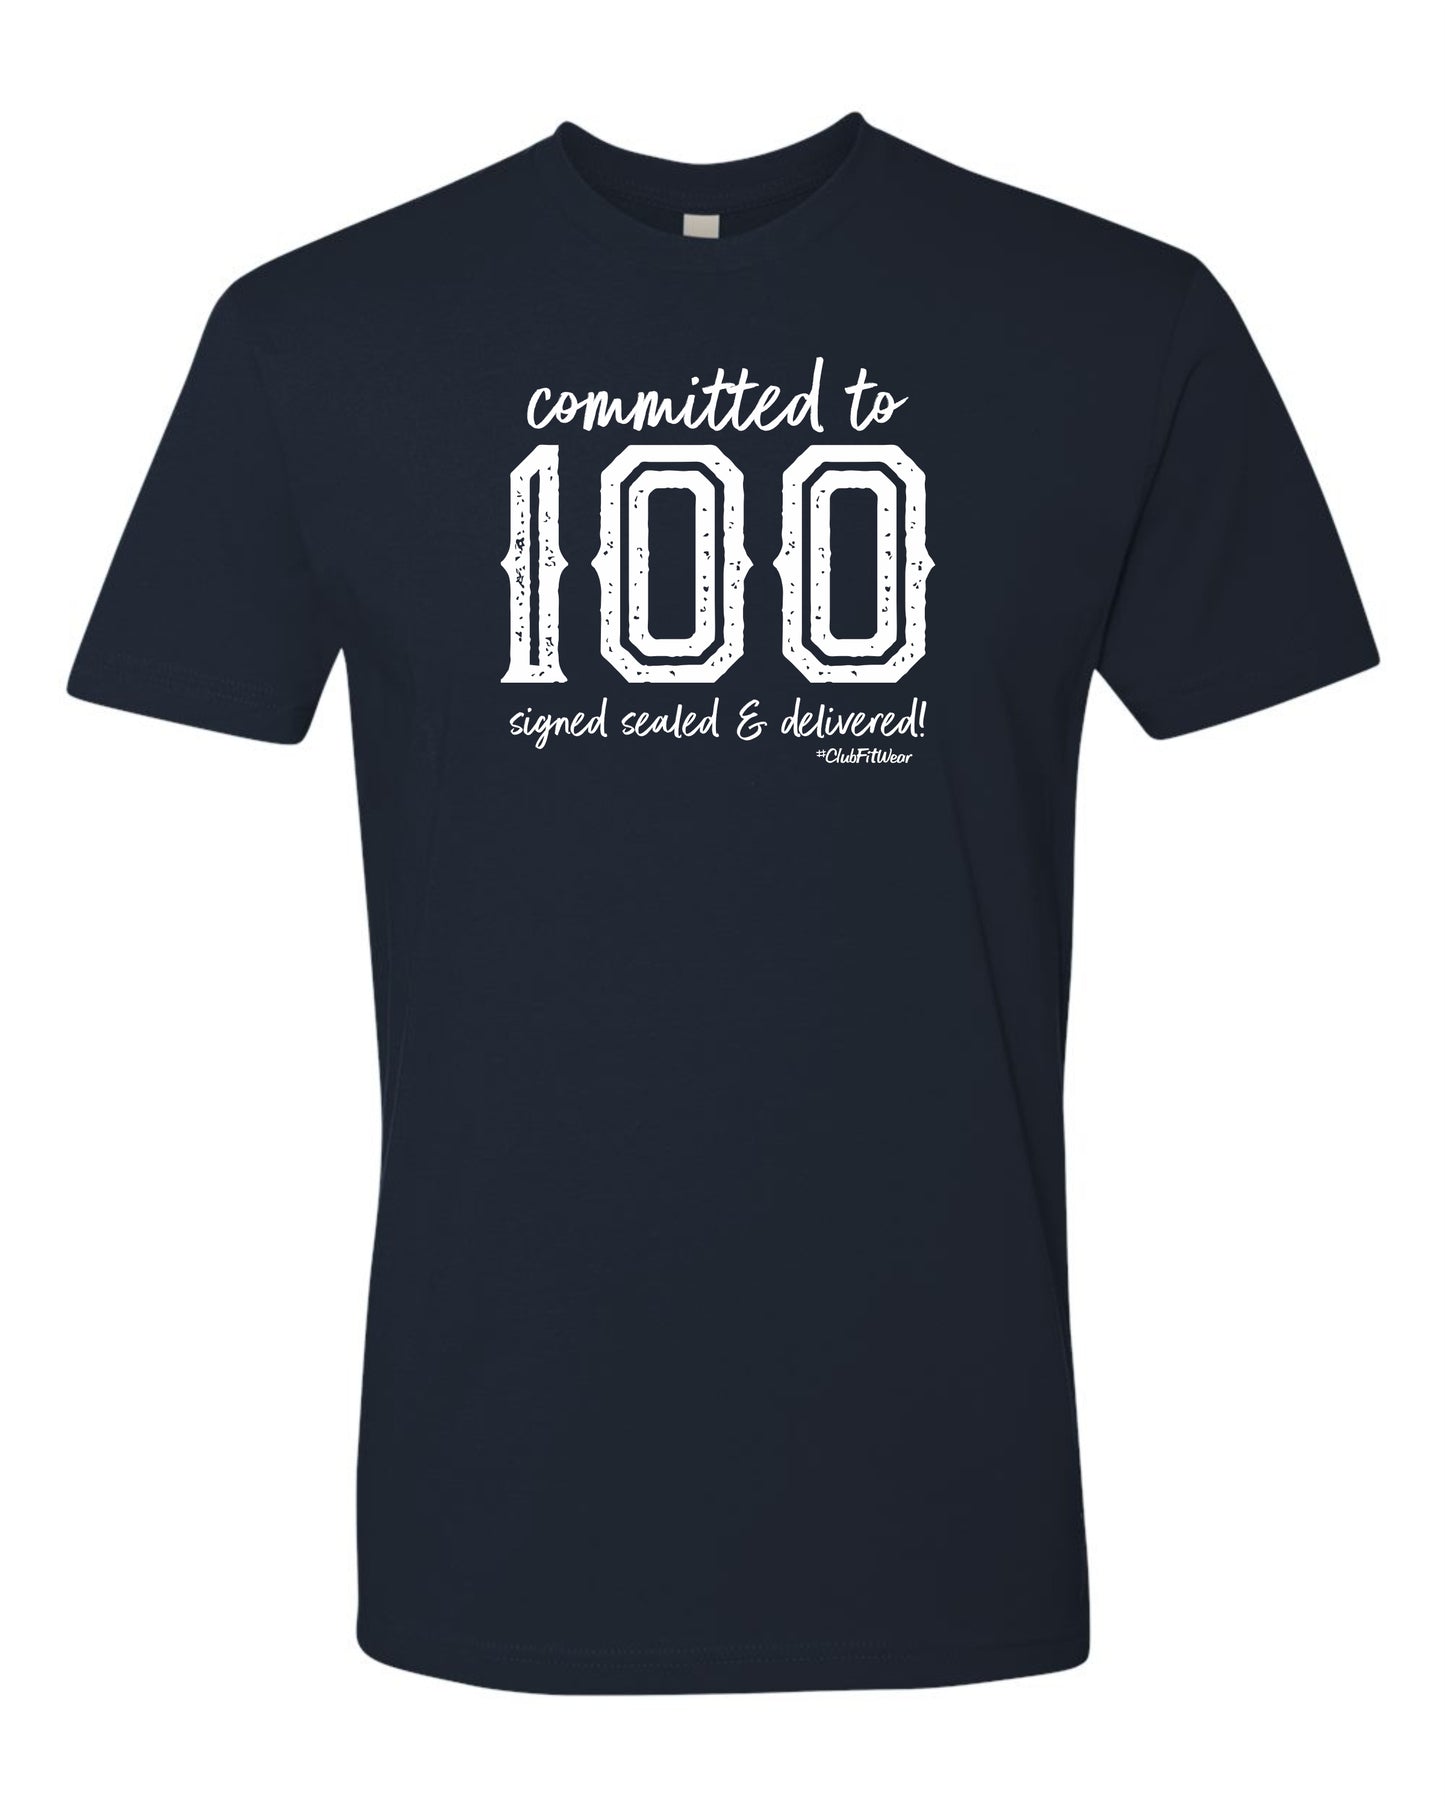 MM100 Signed Sealed & Delivered - Committed to 100